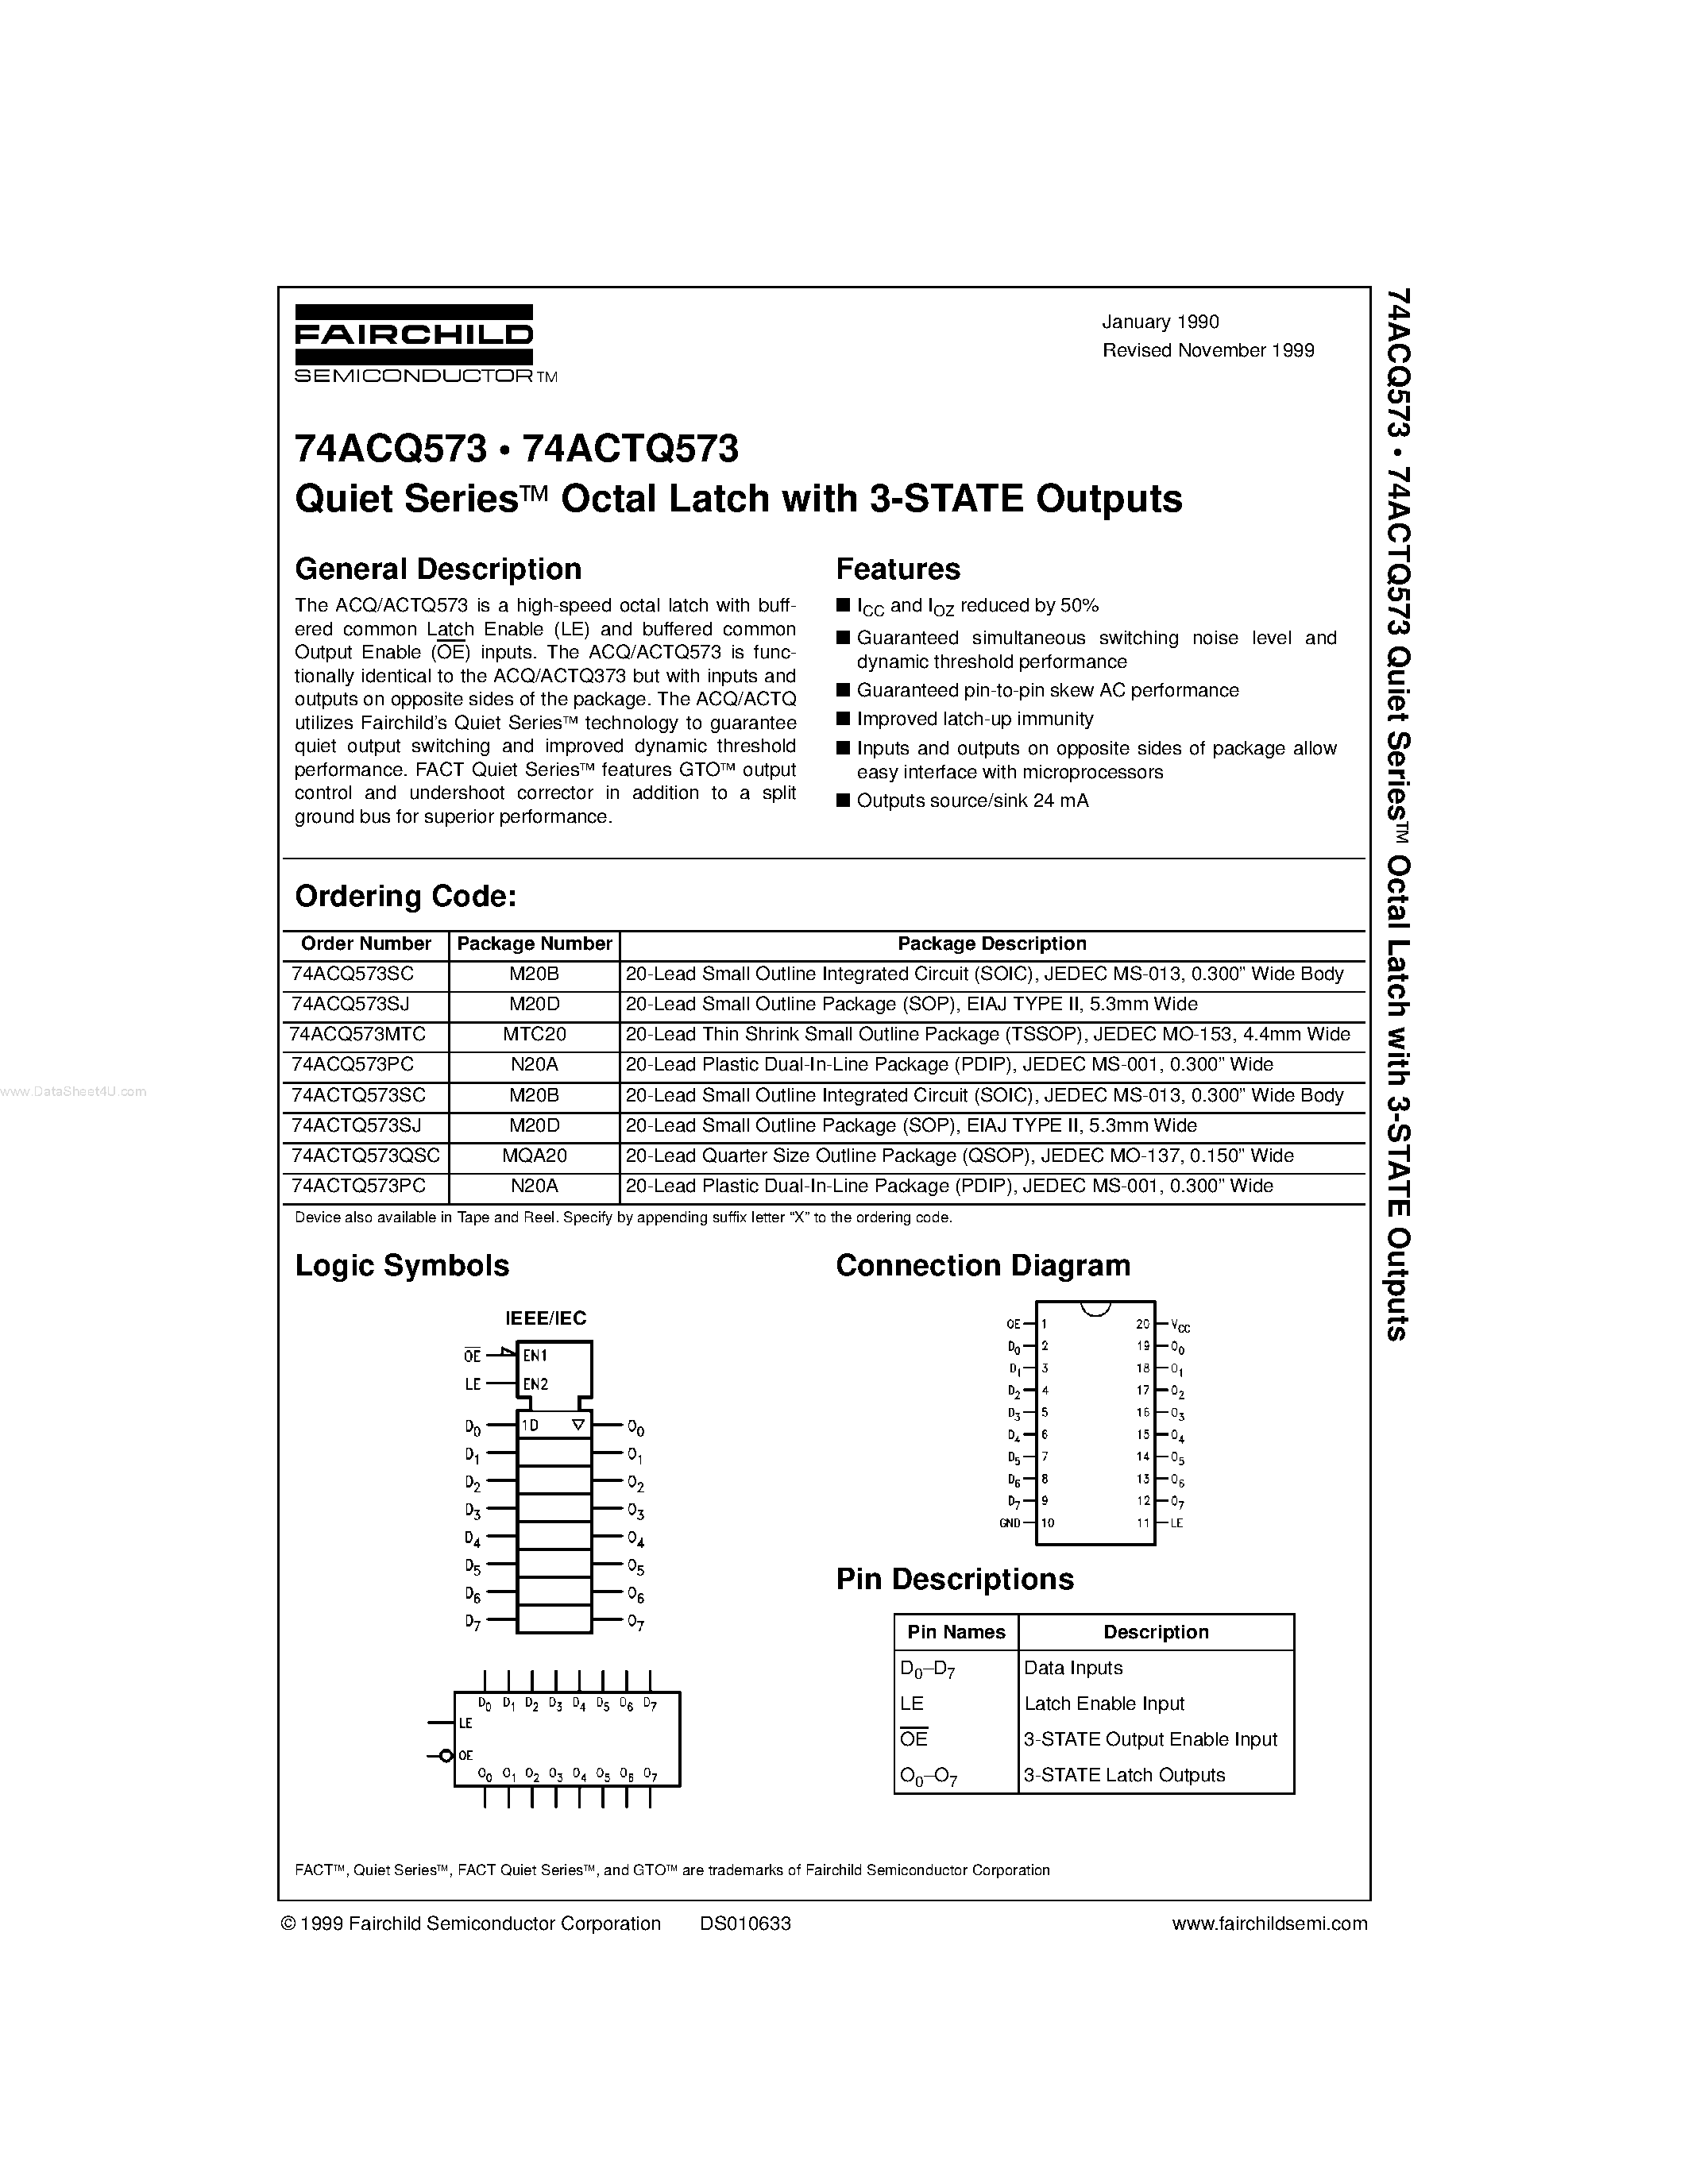 Datasheet 74ACQ573PC - Quiet Series Octal Latch with 3-STATE Outputs page 1